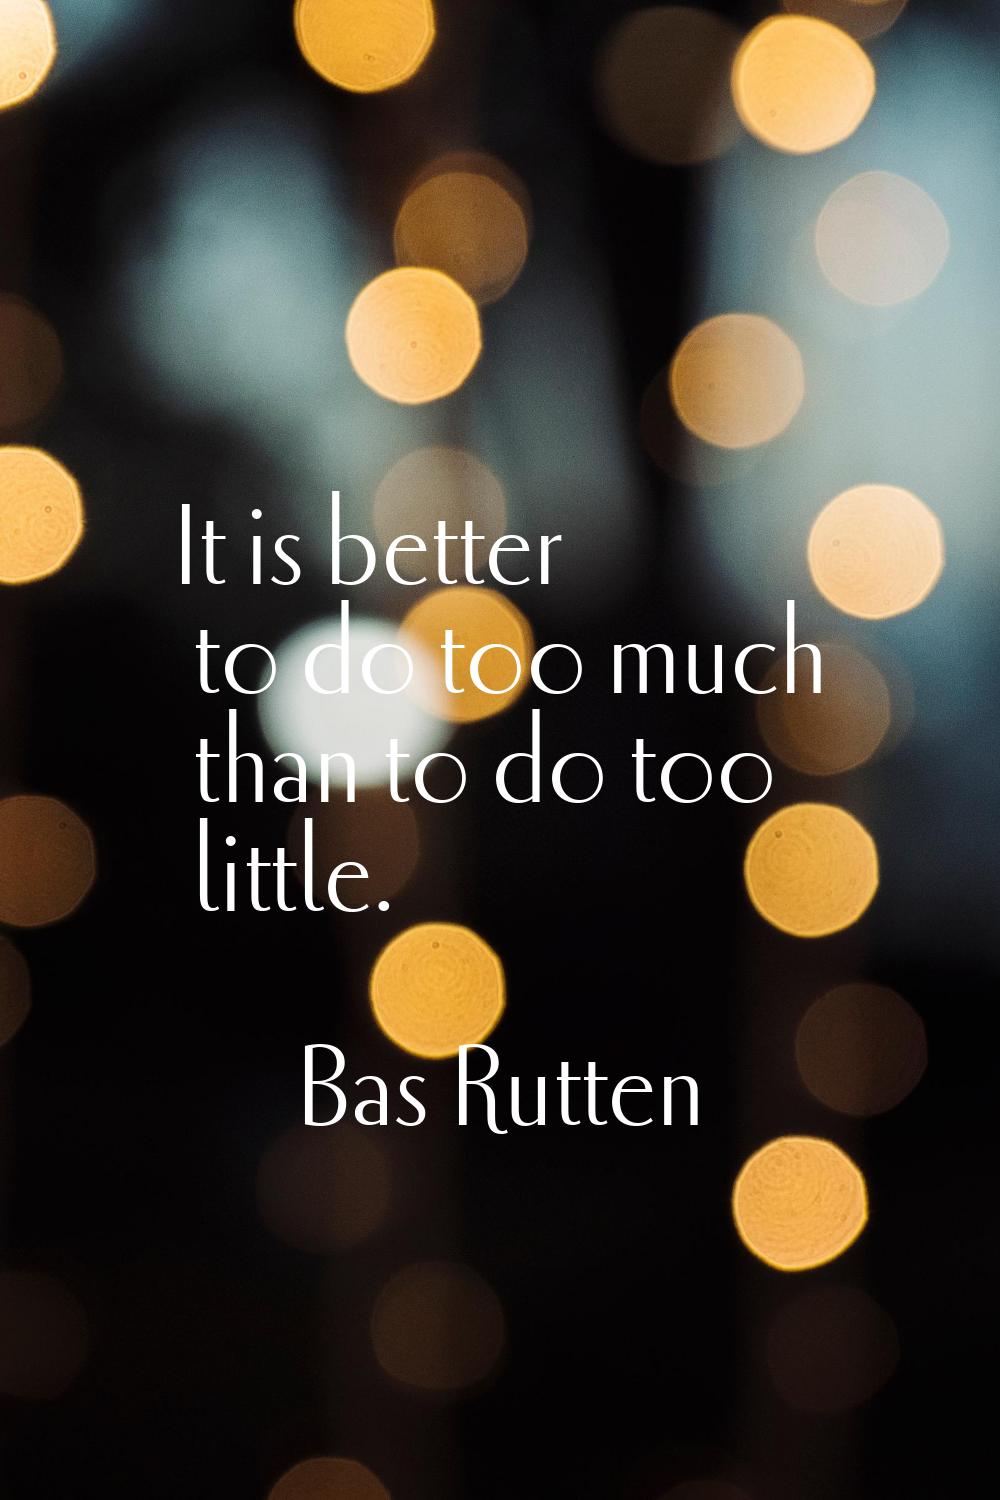 It is better to do too much than to do too little.